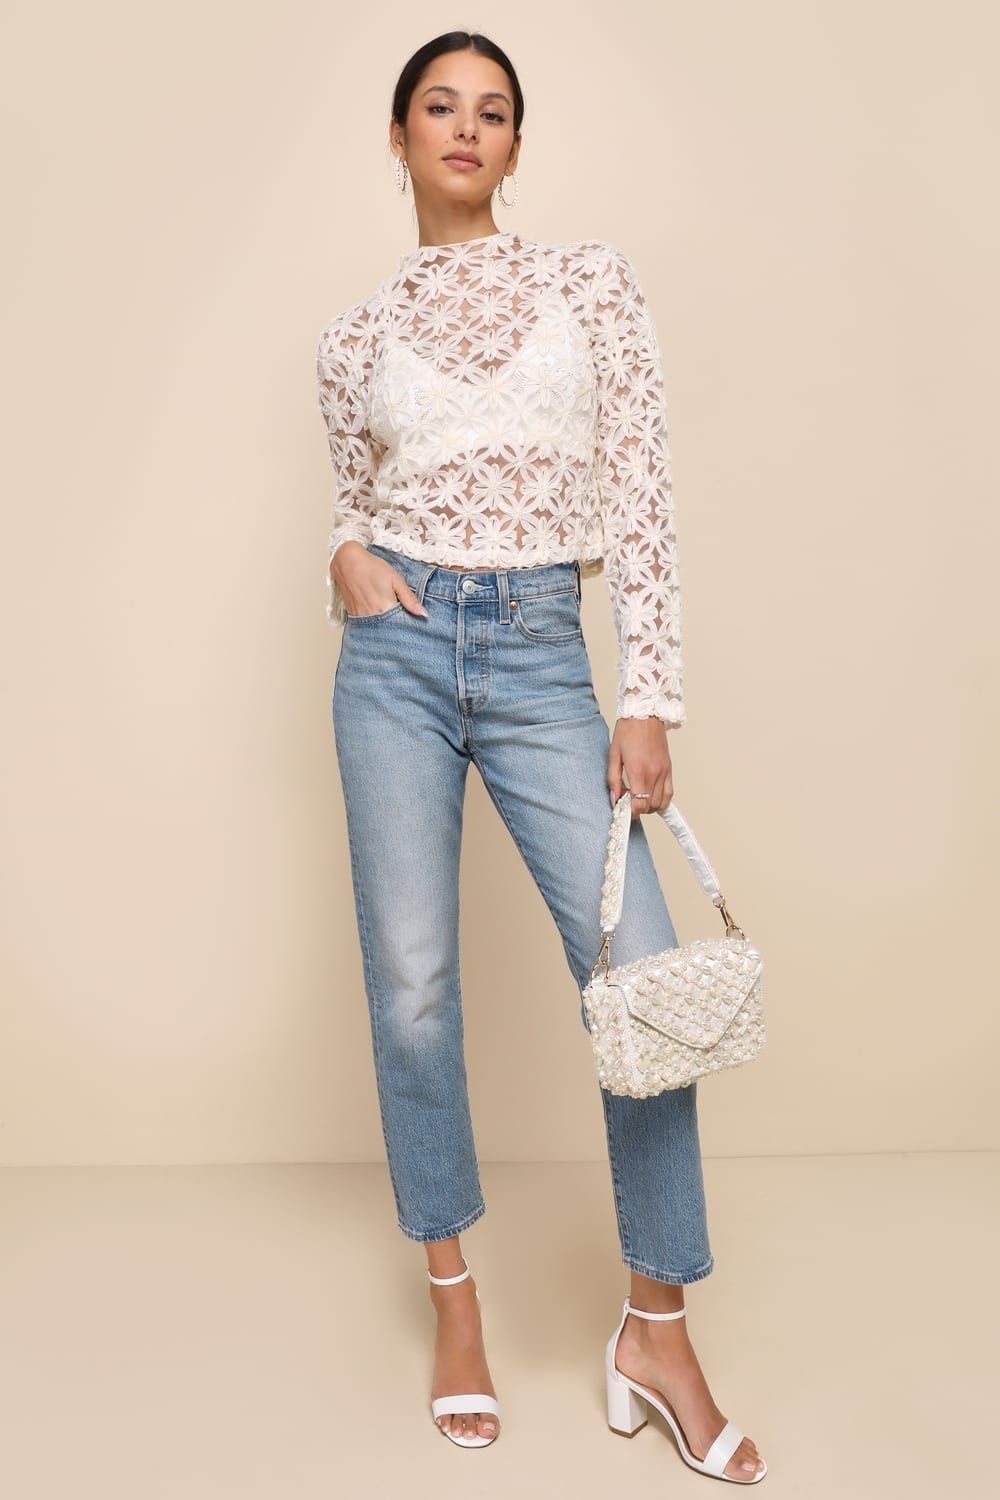 Iconic Persona Ivory Sheer Floral Applique Long Sleeve Top | Lulus